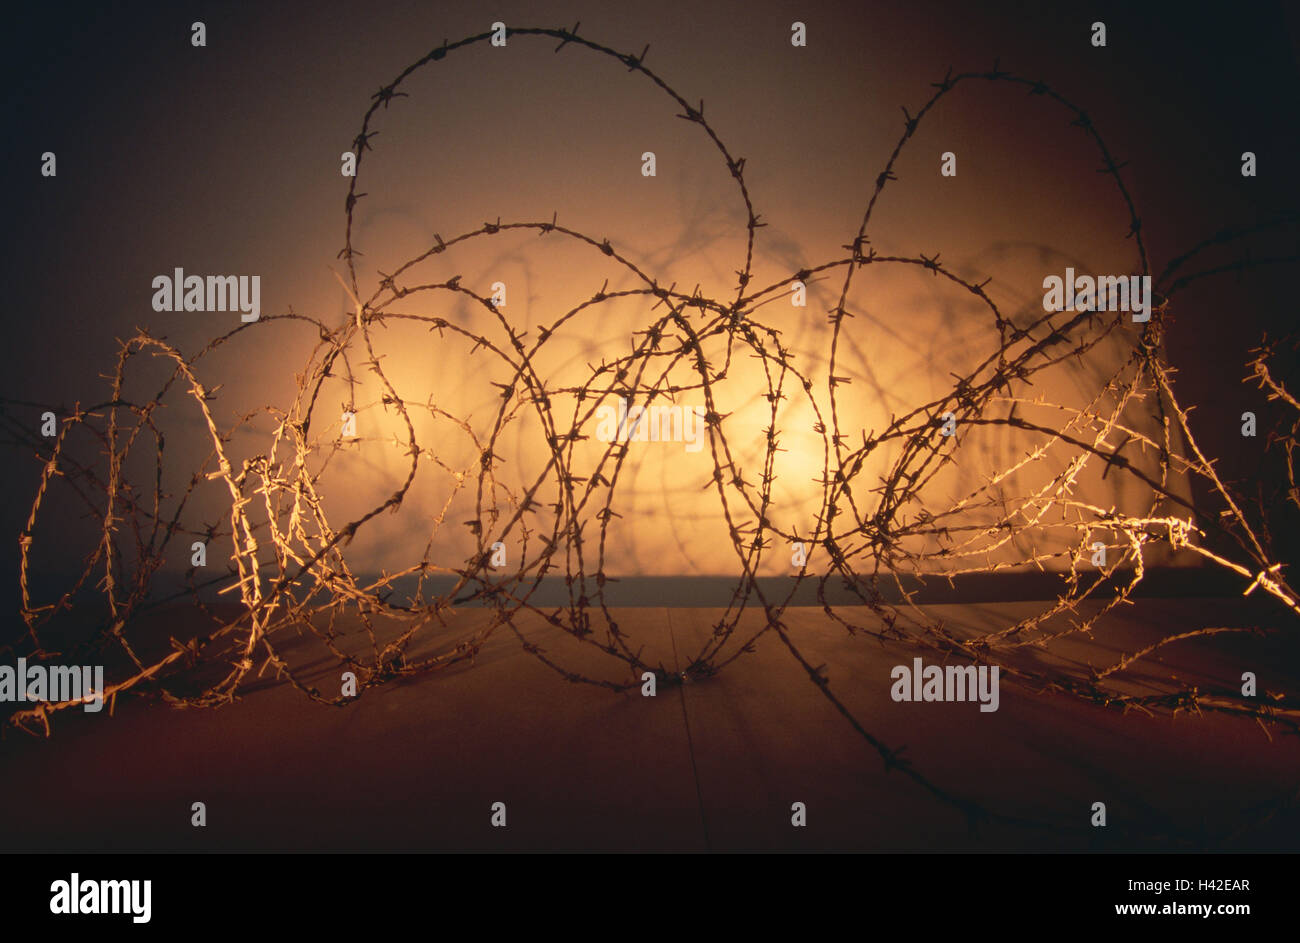 Barbed wire, confuses, light effect    Fence, barbed wire fence, demarcation, Eingrenzung,,  Closing off, protection, security, theft protection, precaution, symbol, concept, break-in, prison, obstacle, property, danger, hazard zone, Concept, chaos, chaos Stock Photo